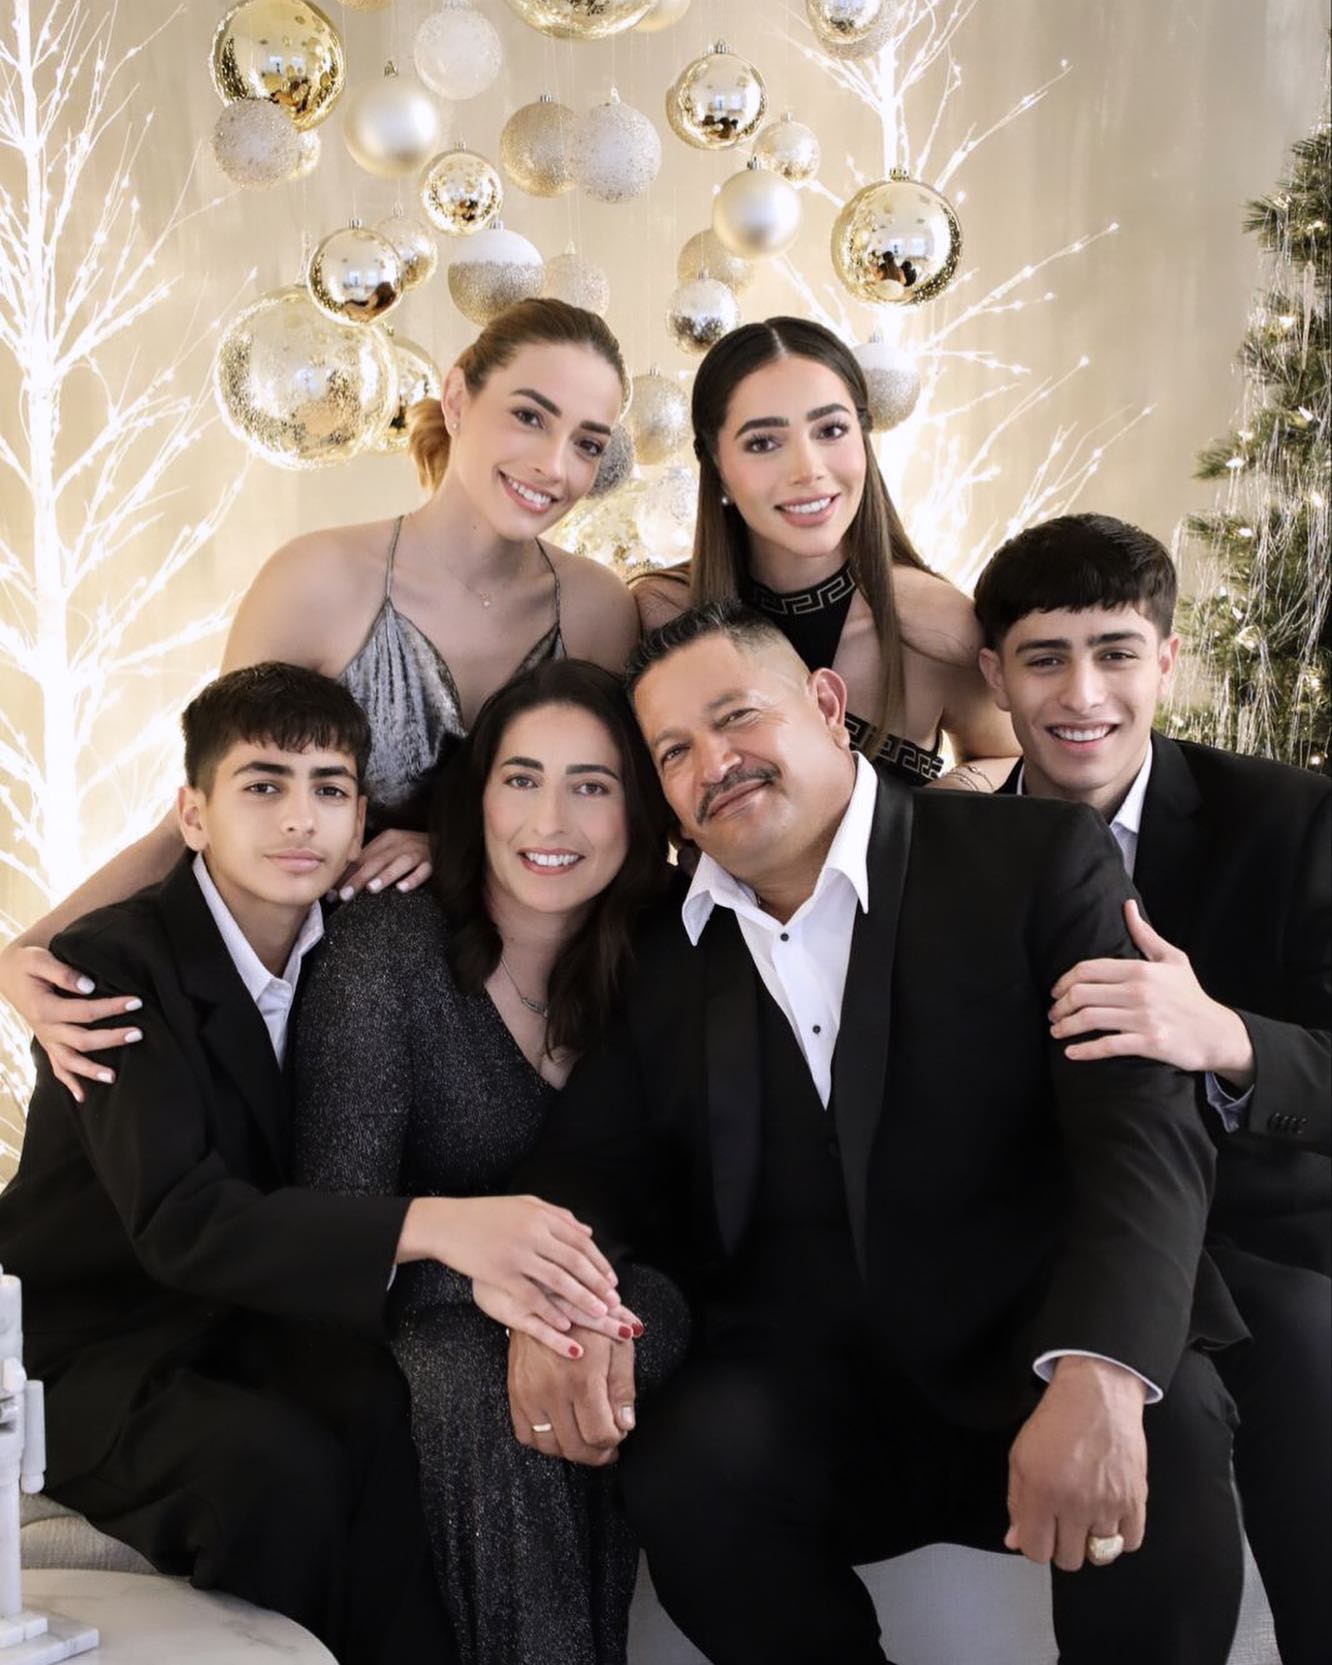 My beautiful family is my favorite gift!💝 Merry Christmas to everyone✨ God Bless!